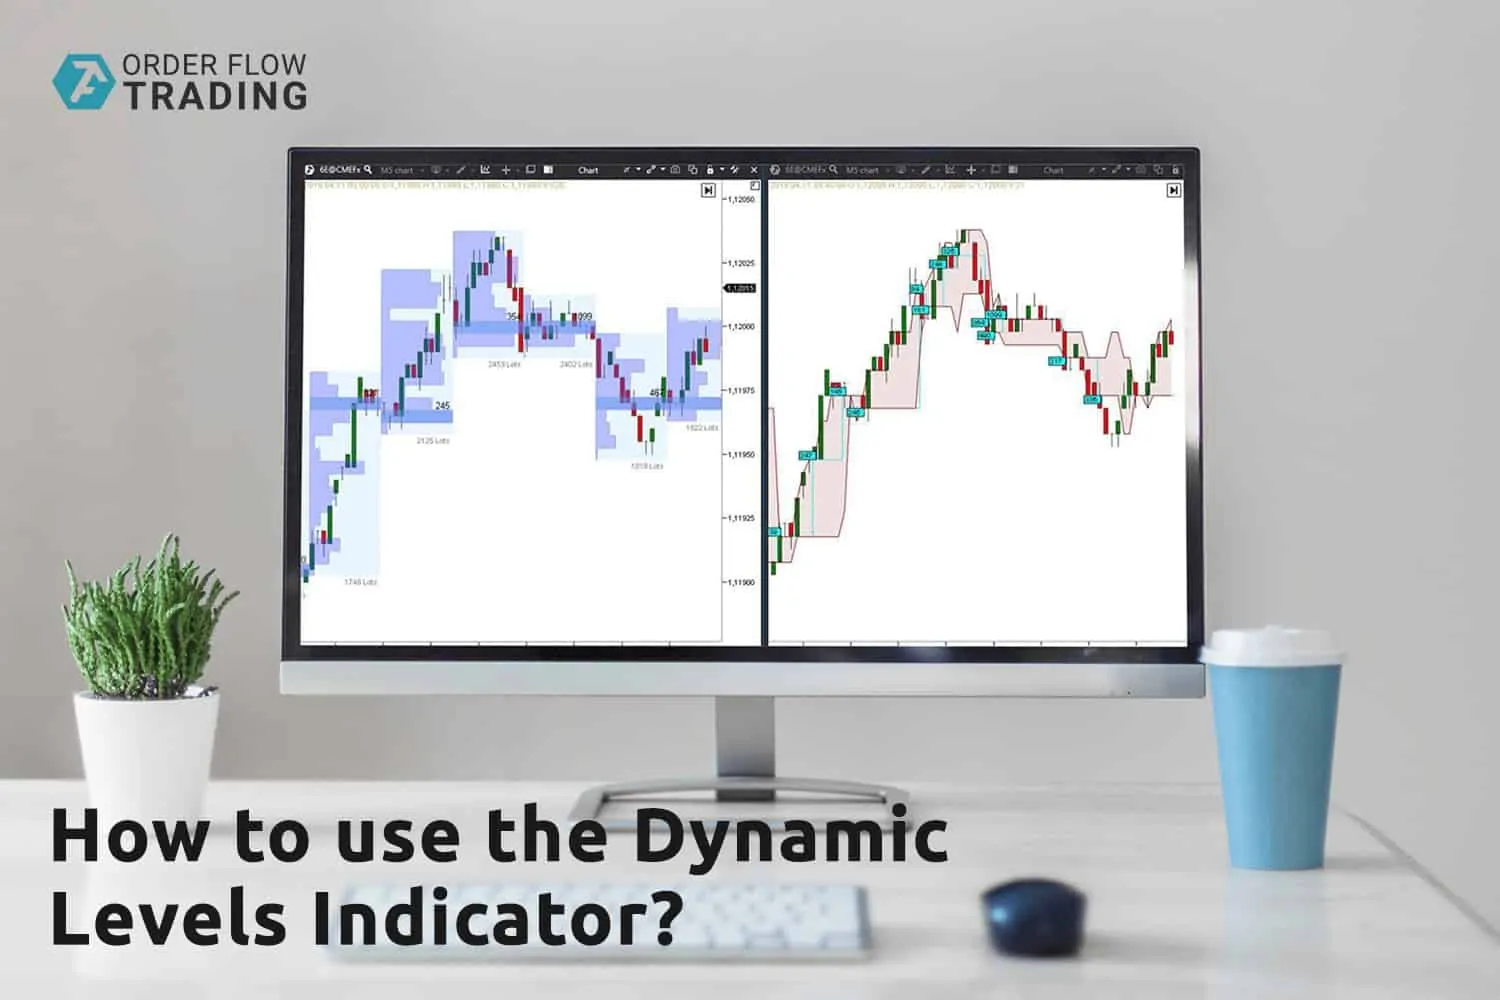 Analysis of levels for trading with the Dynamic Levels indicator